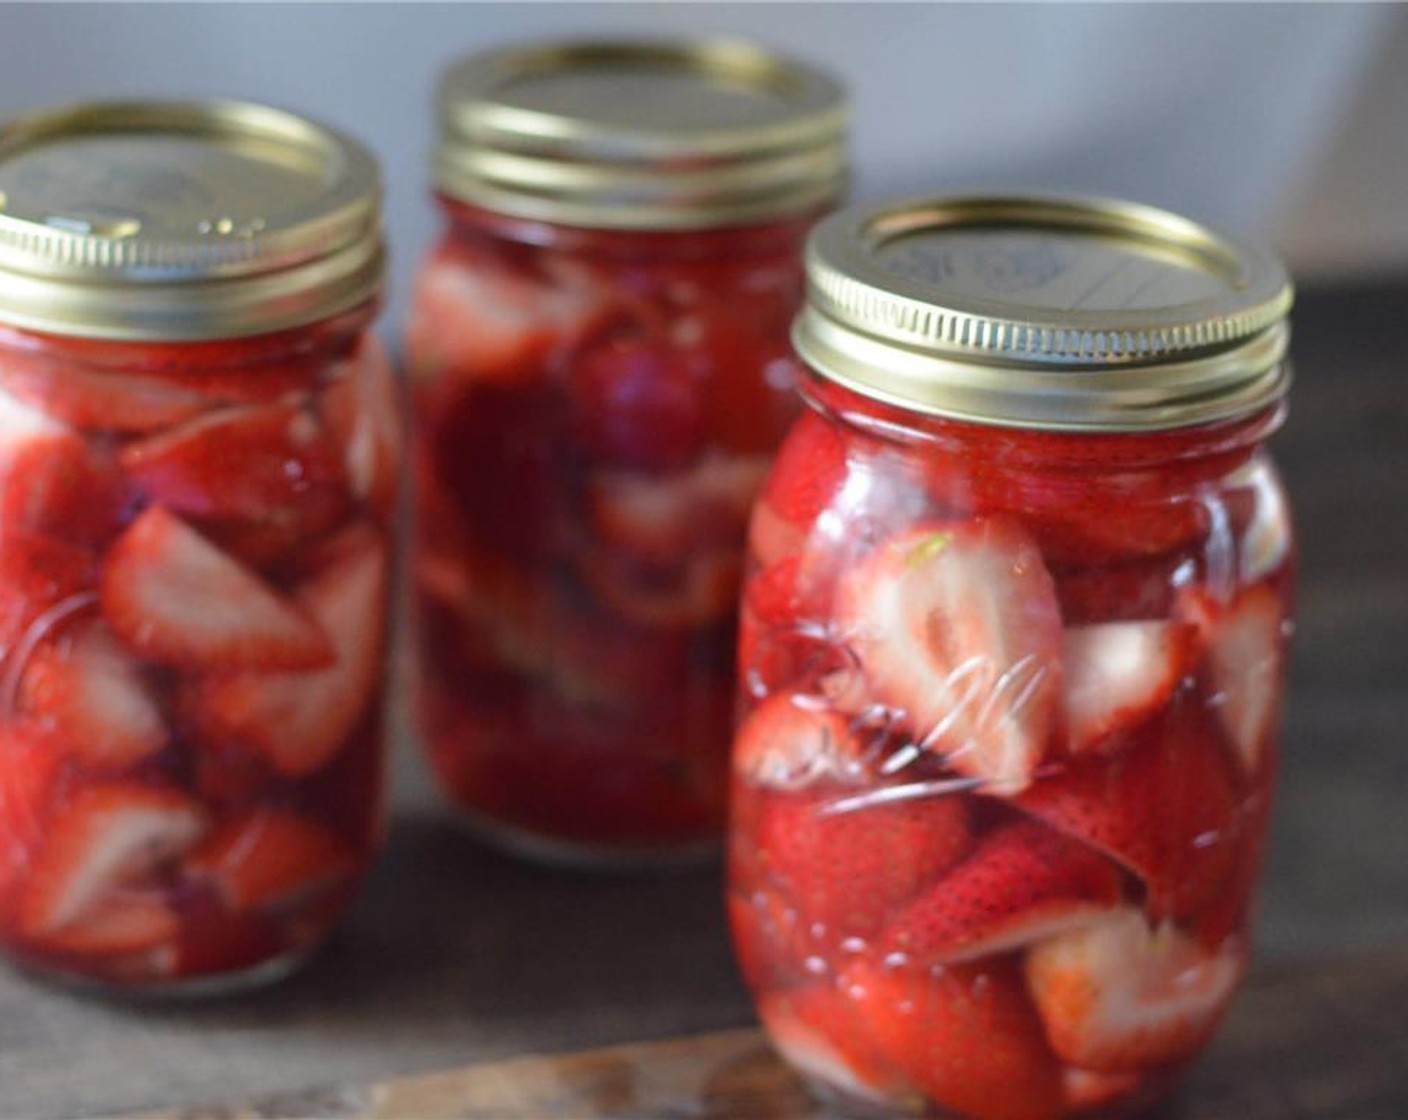 step 3 Fill mason jars with strawberries, packing them in there. Pour GREY GOOSE® Vodka (3 cups) over strawberries, filling to just below the rim.